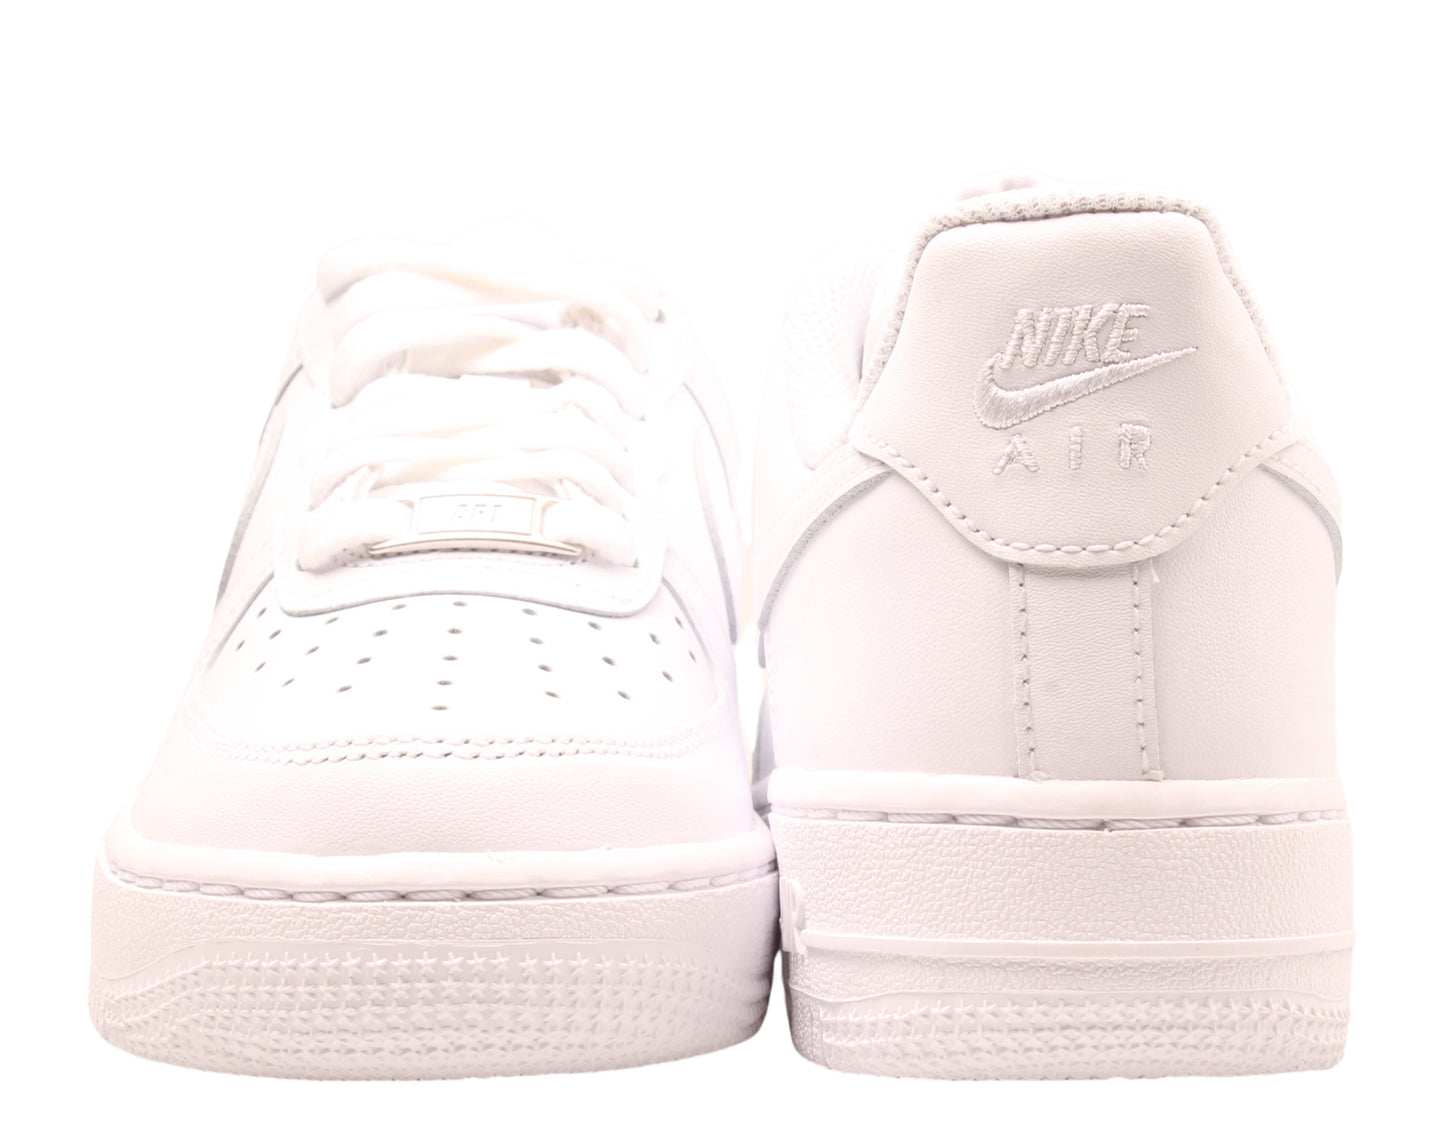 Nike Air Force 1 07 Women's Basketball Shoes